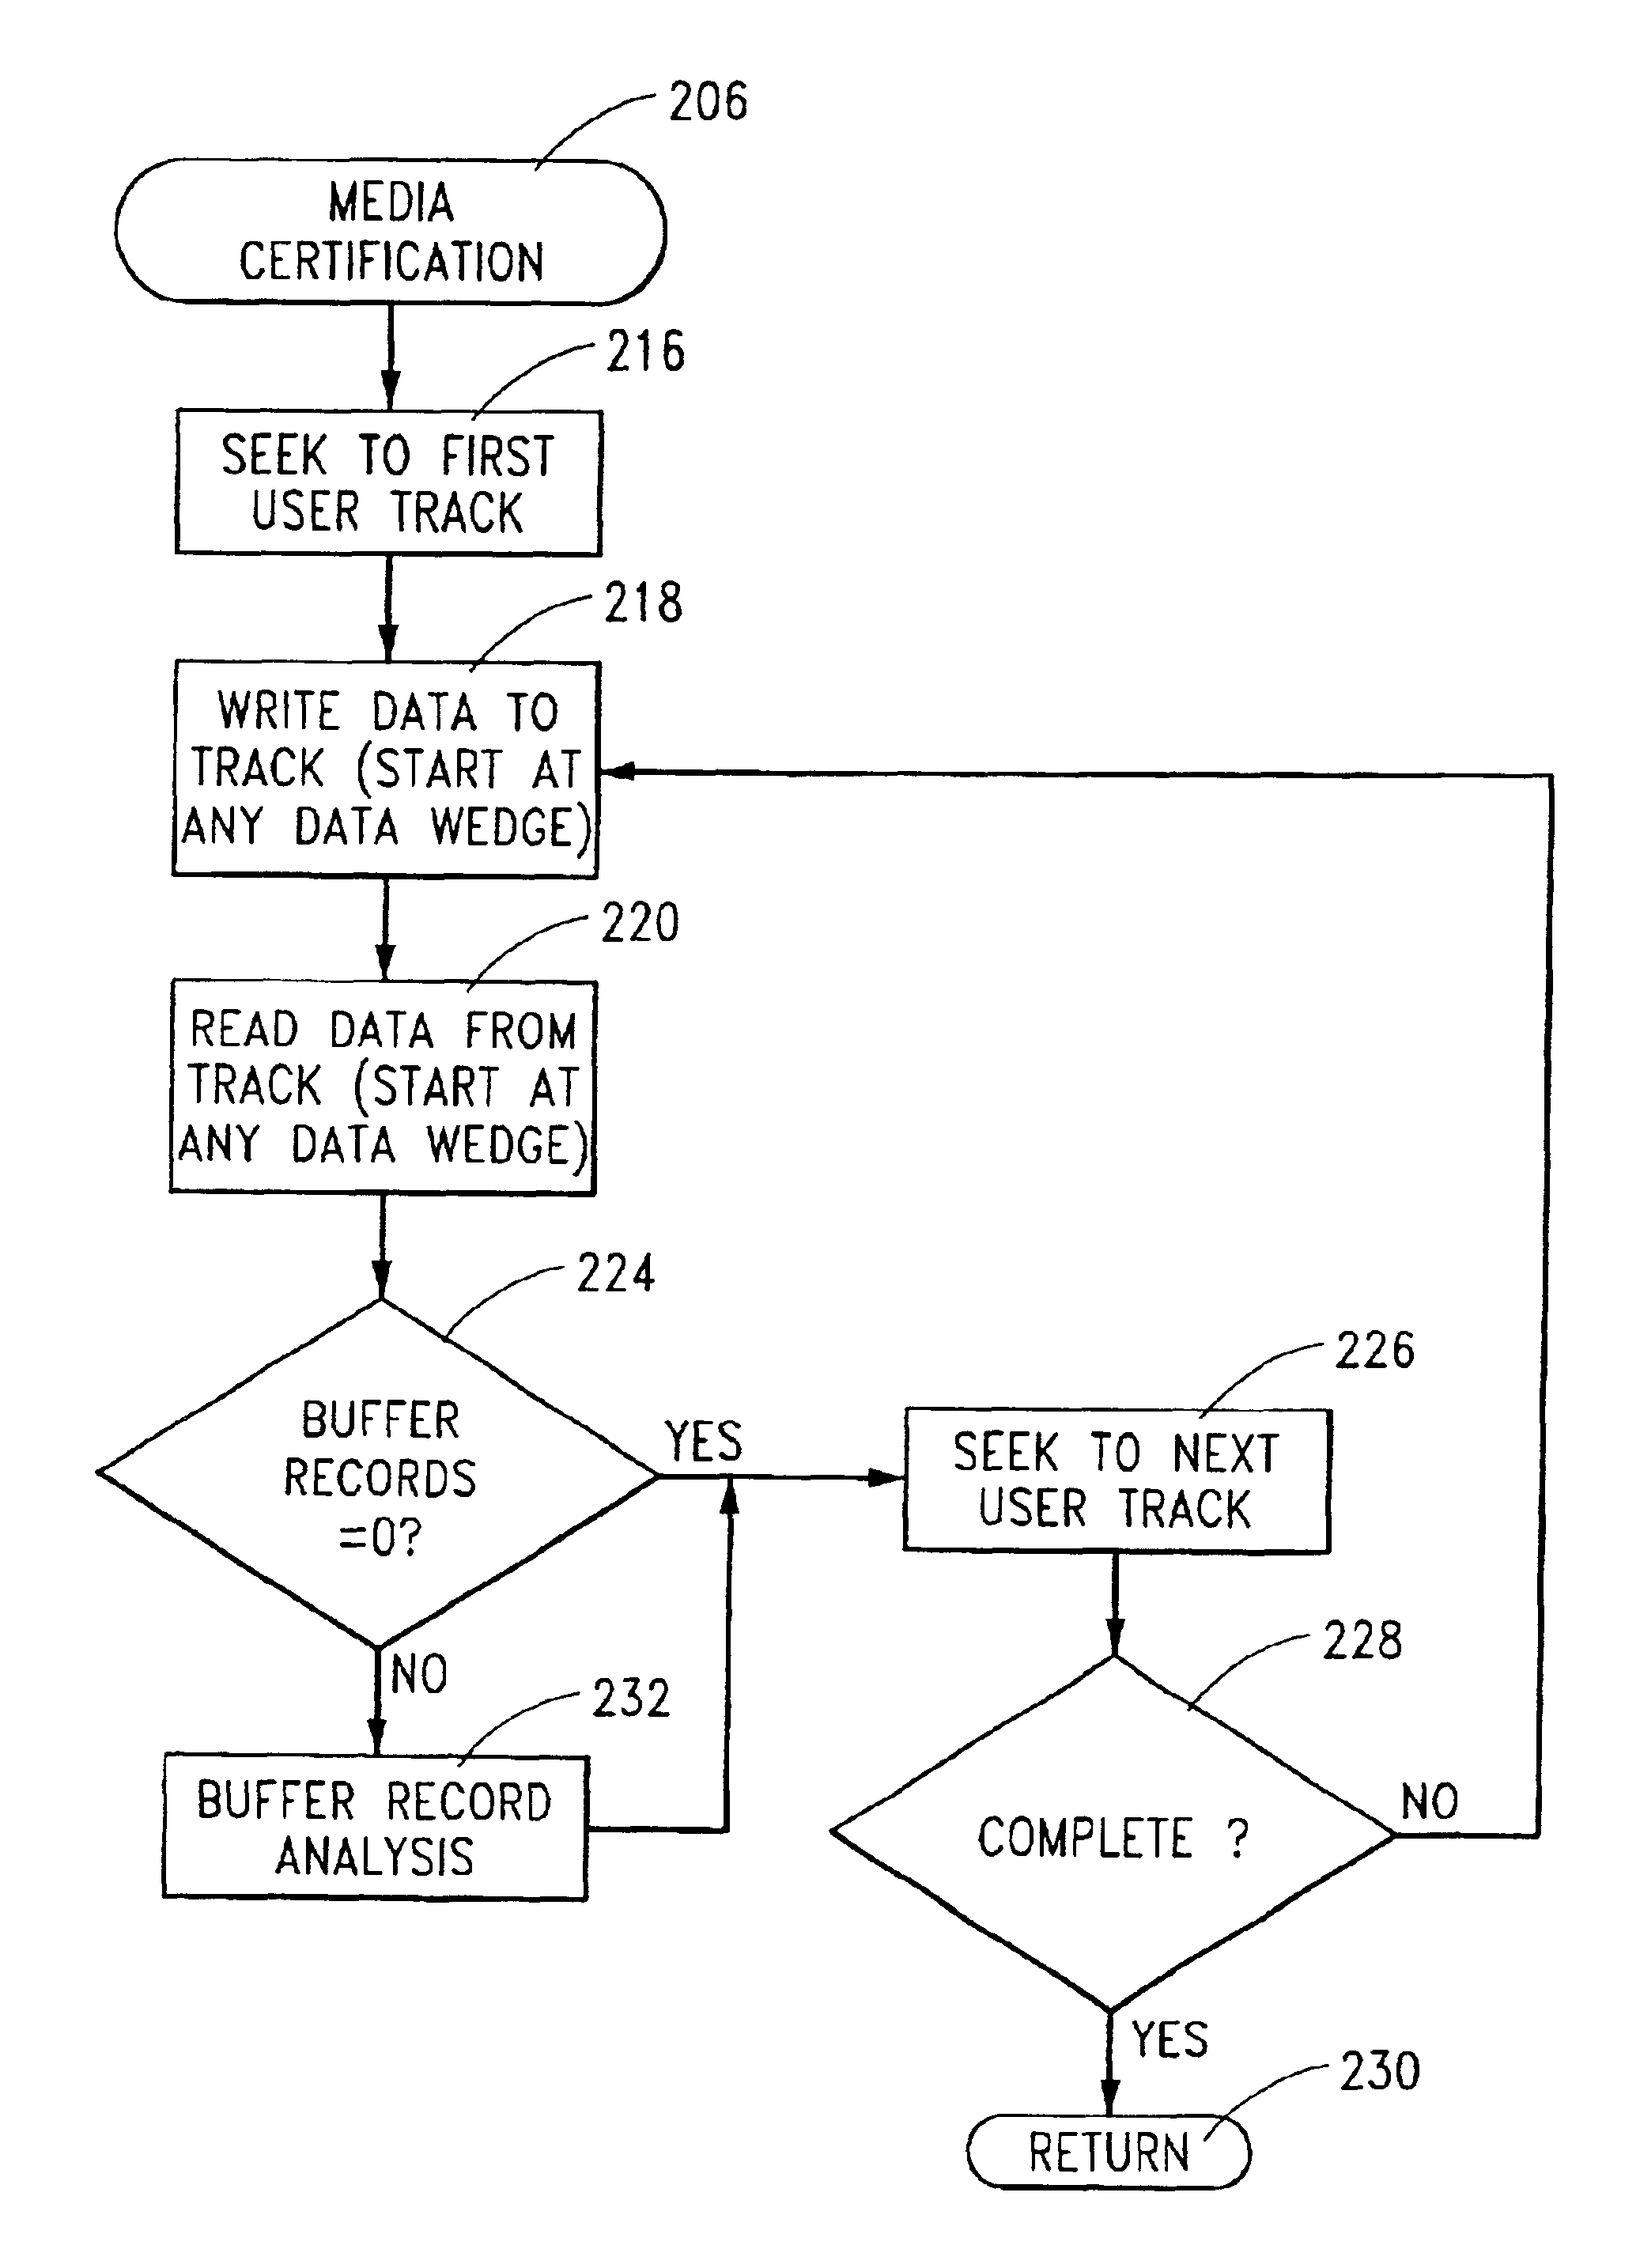 User data wedge media certification apparatus and method